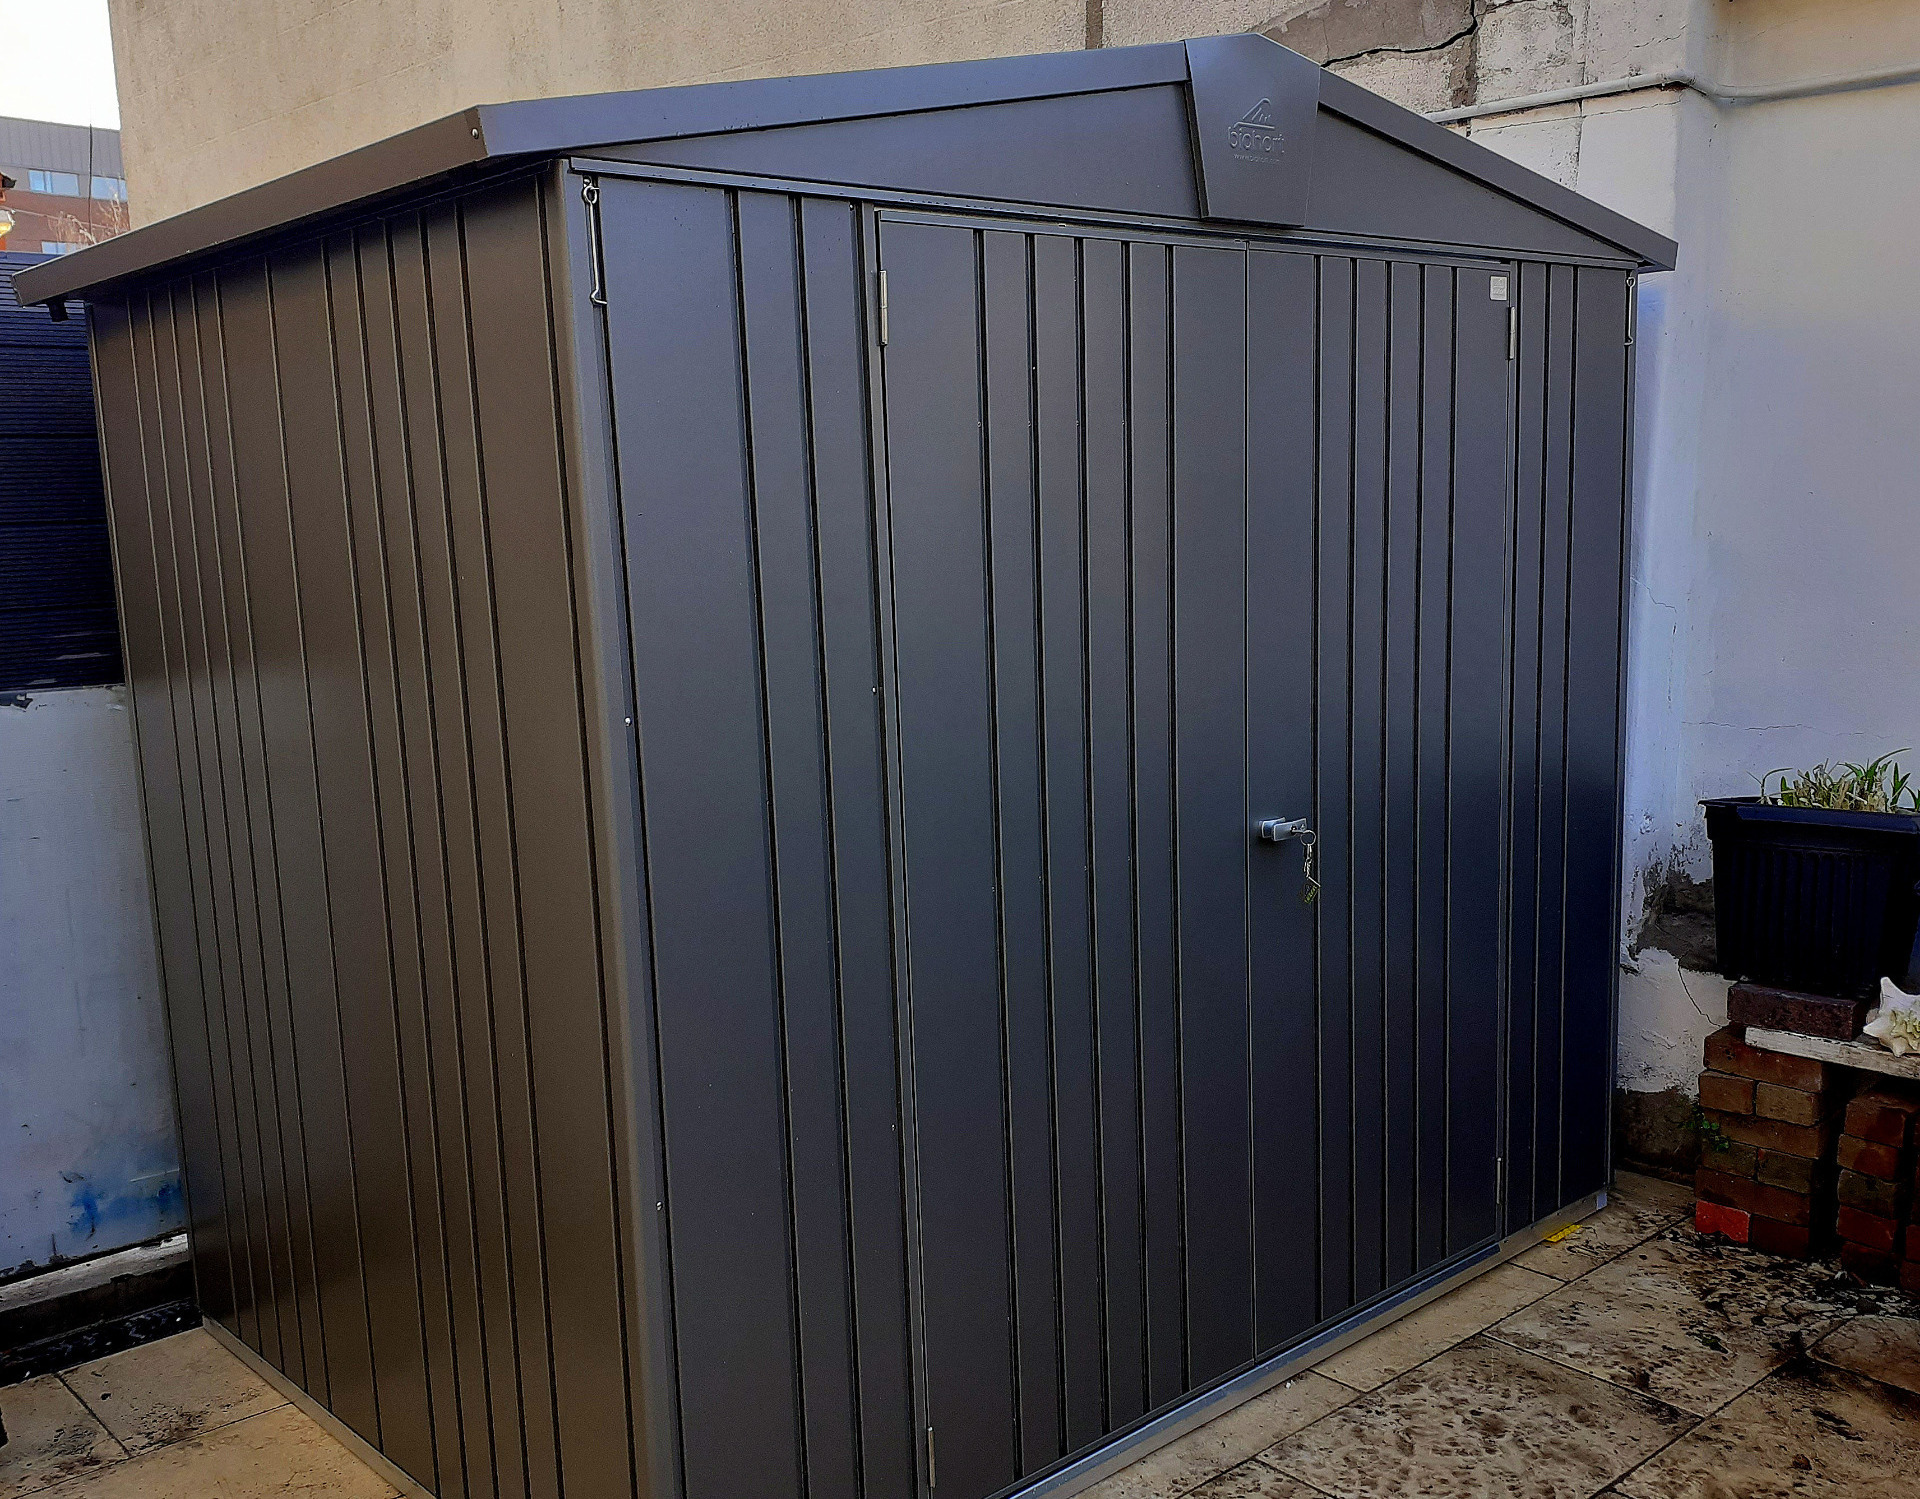 Biohort Europa Size 3 Garden Shed in metallic quartz grey, supplied & fitted in Dublin 7  | Owen Chubb Ireland's Leading supplier of Biohort Garden Sheds & Storage Solutions | Supplied + Fitted Nationwide